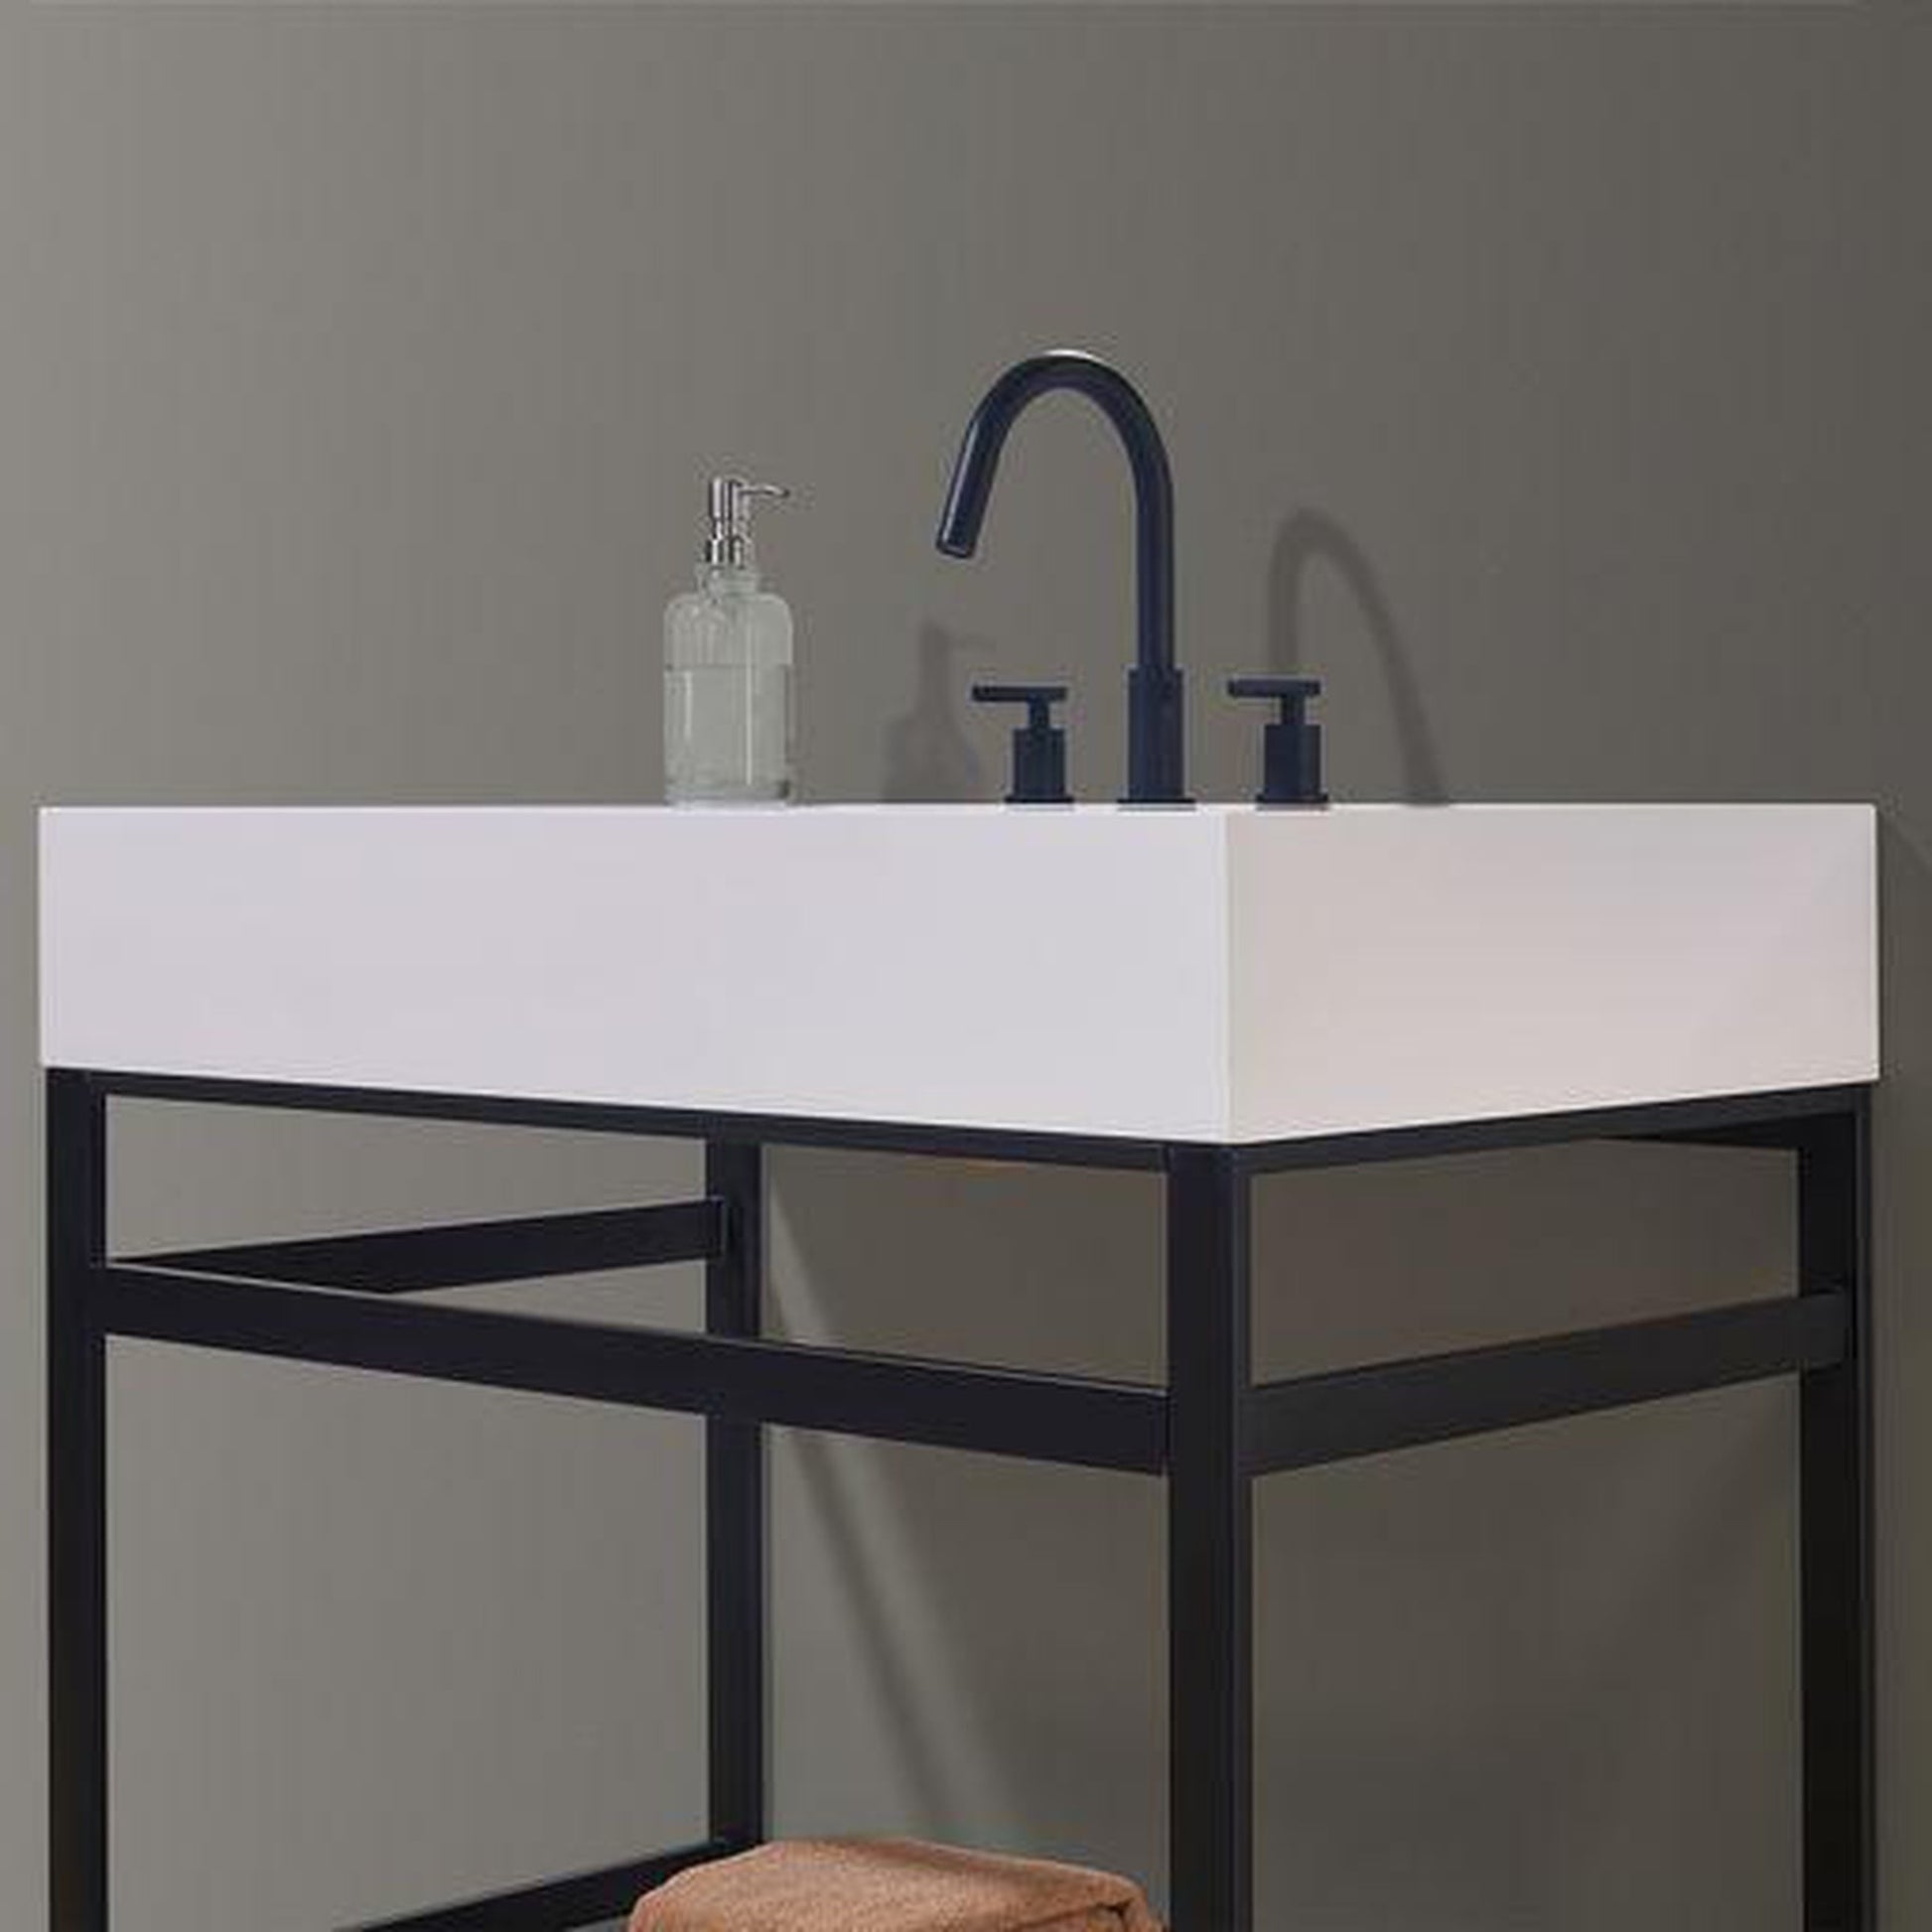 Altair Edolo 36" Matte Black Single Stainless Steel Bathroom Vanity Set Console With Mirror, Snow White Stone Top, Single Rectangular Undermount Ceramic Sink, and Safety Overflow Hole